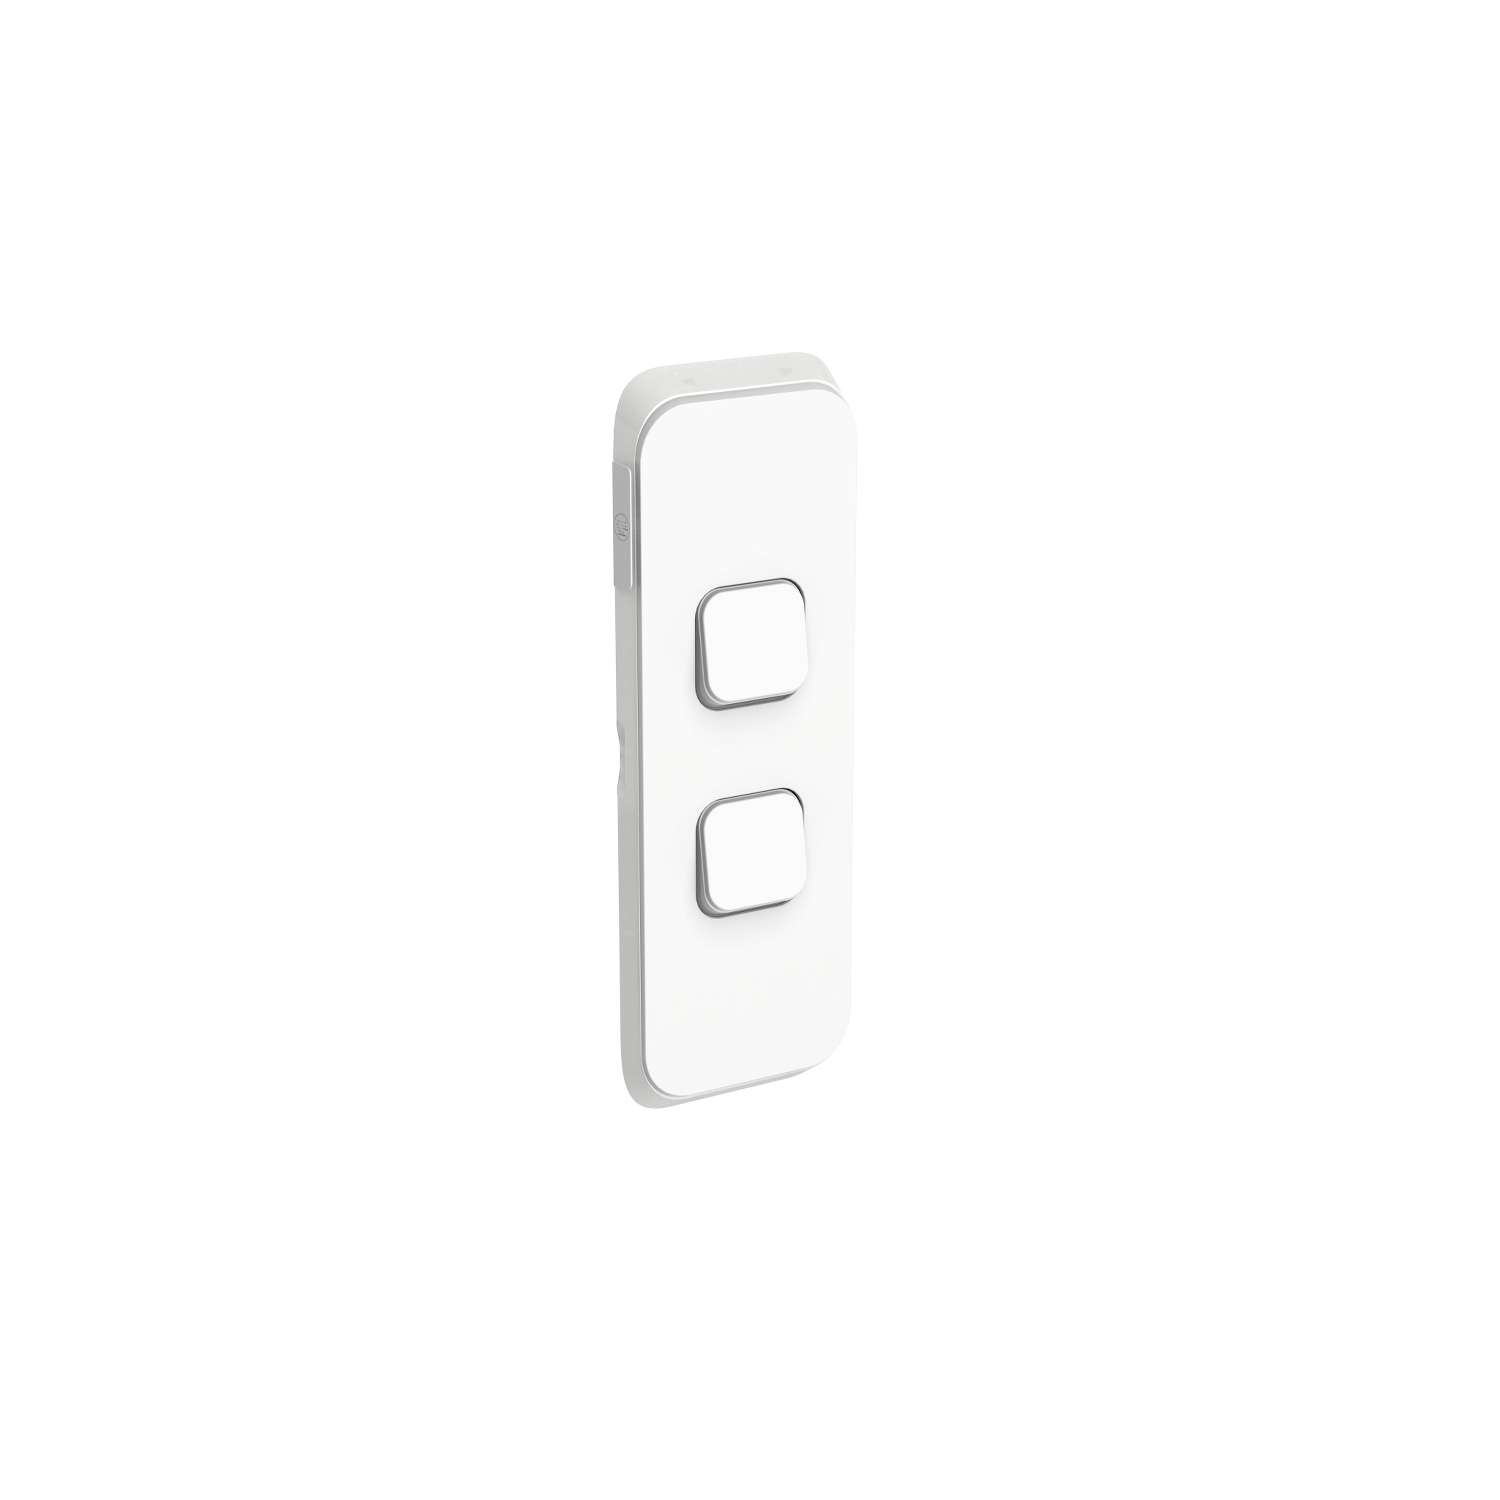 PDL362C-VW - PDL Iconic Cover Plate Switch Architrave 2Gang - Vivid White